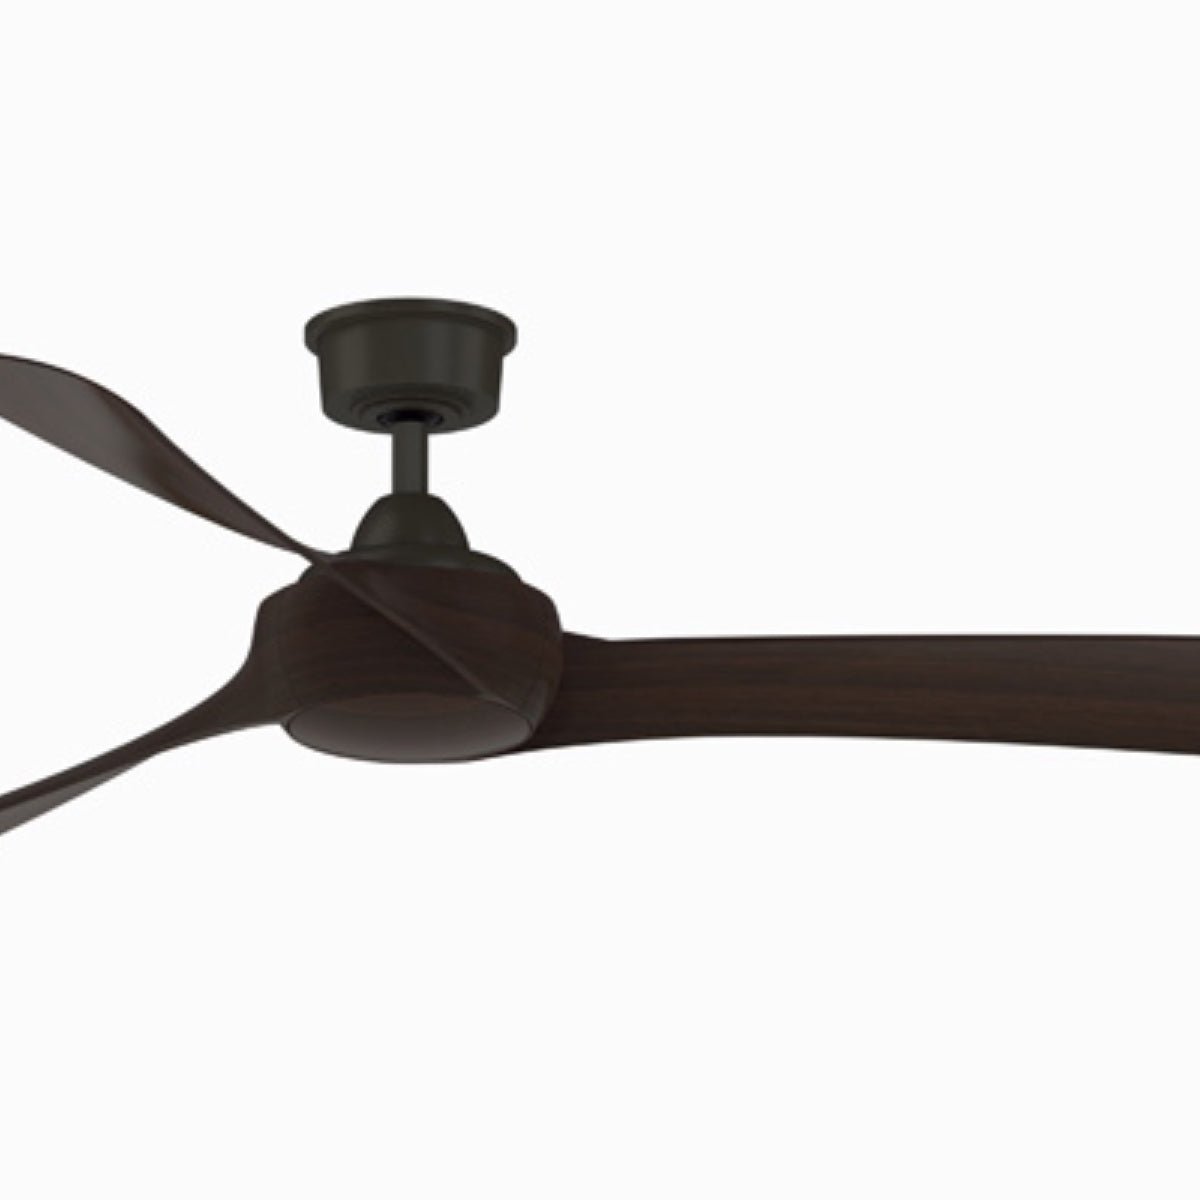 Wrap Custom Indoor/Outdoor Ceiling Fan Motor With Remote, 44-60" Blades Sold Separately